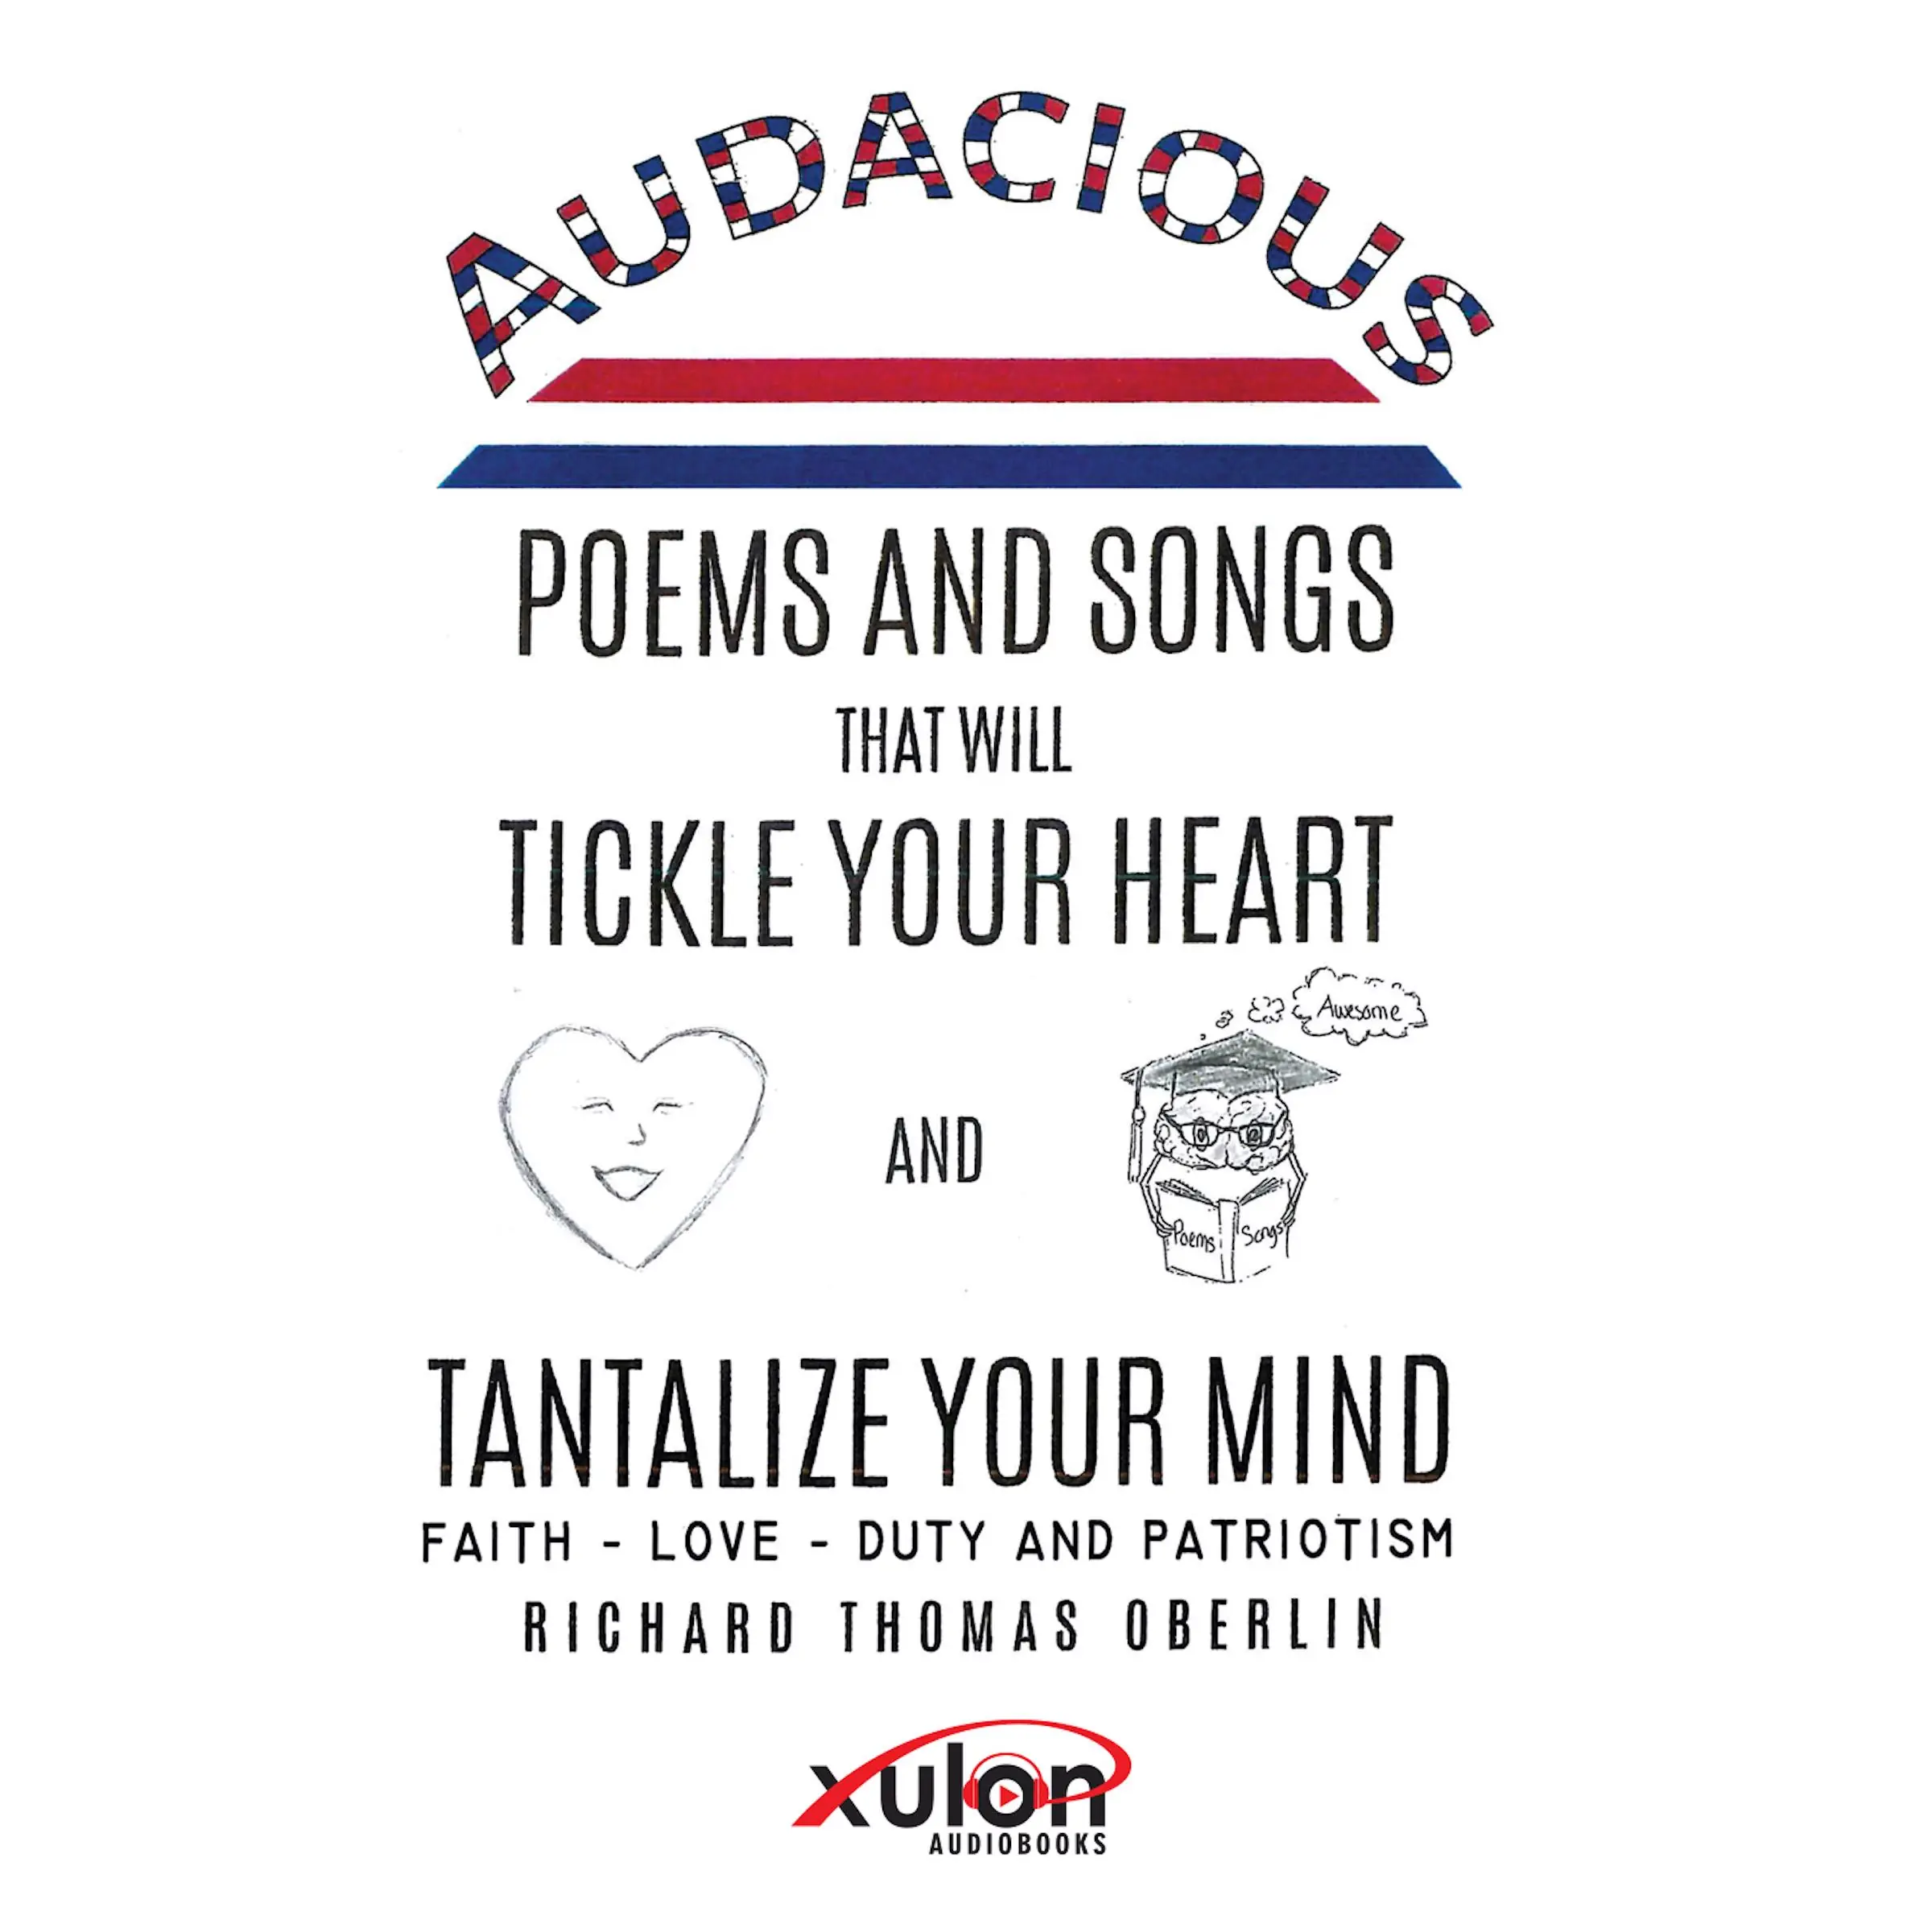 Audacious Poems and Songs That Will Tickle Your Heart And Tantalize Your Mind: Faith - Love- Duty and Patriotism by Richard Thomas Oberlin Audiobook